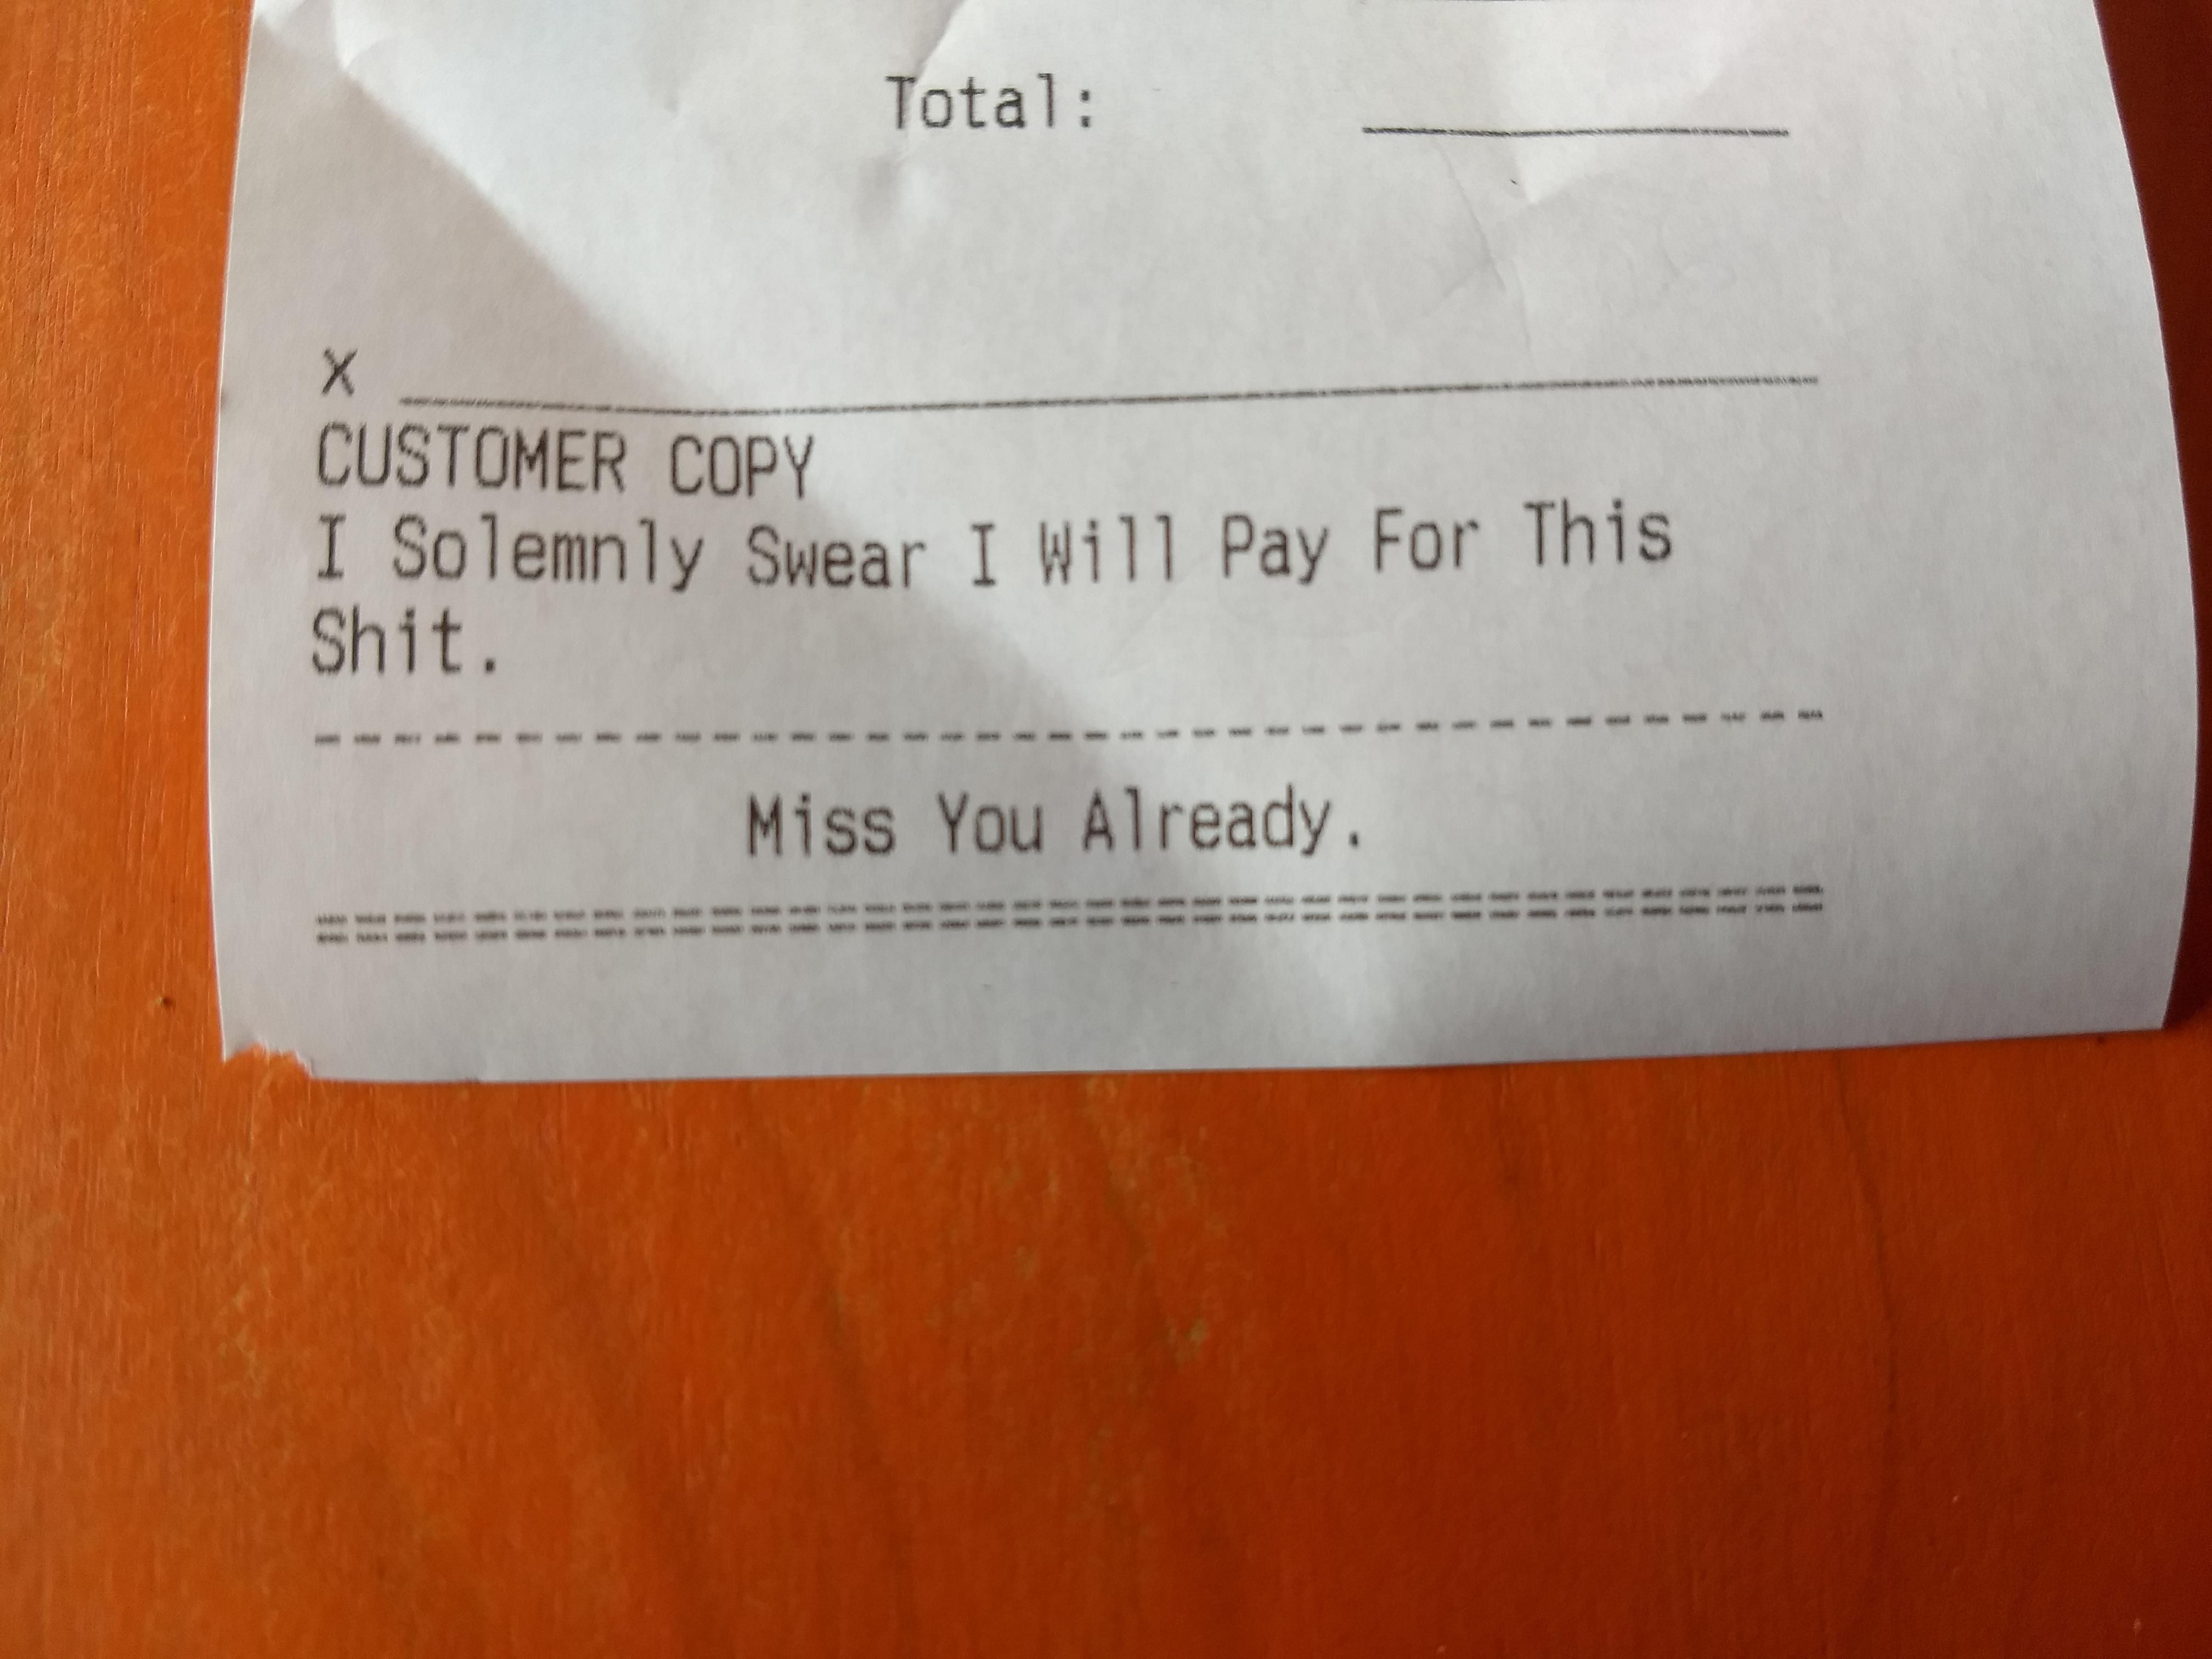 Got this on the bottom of a receipt today.